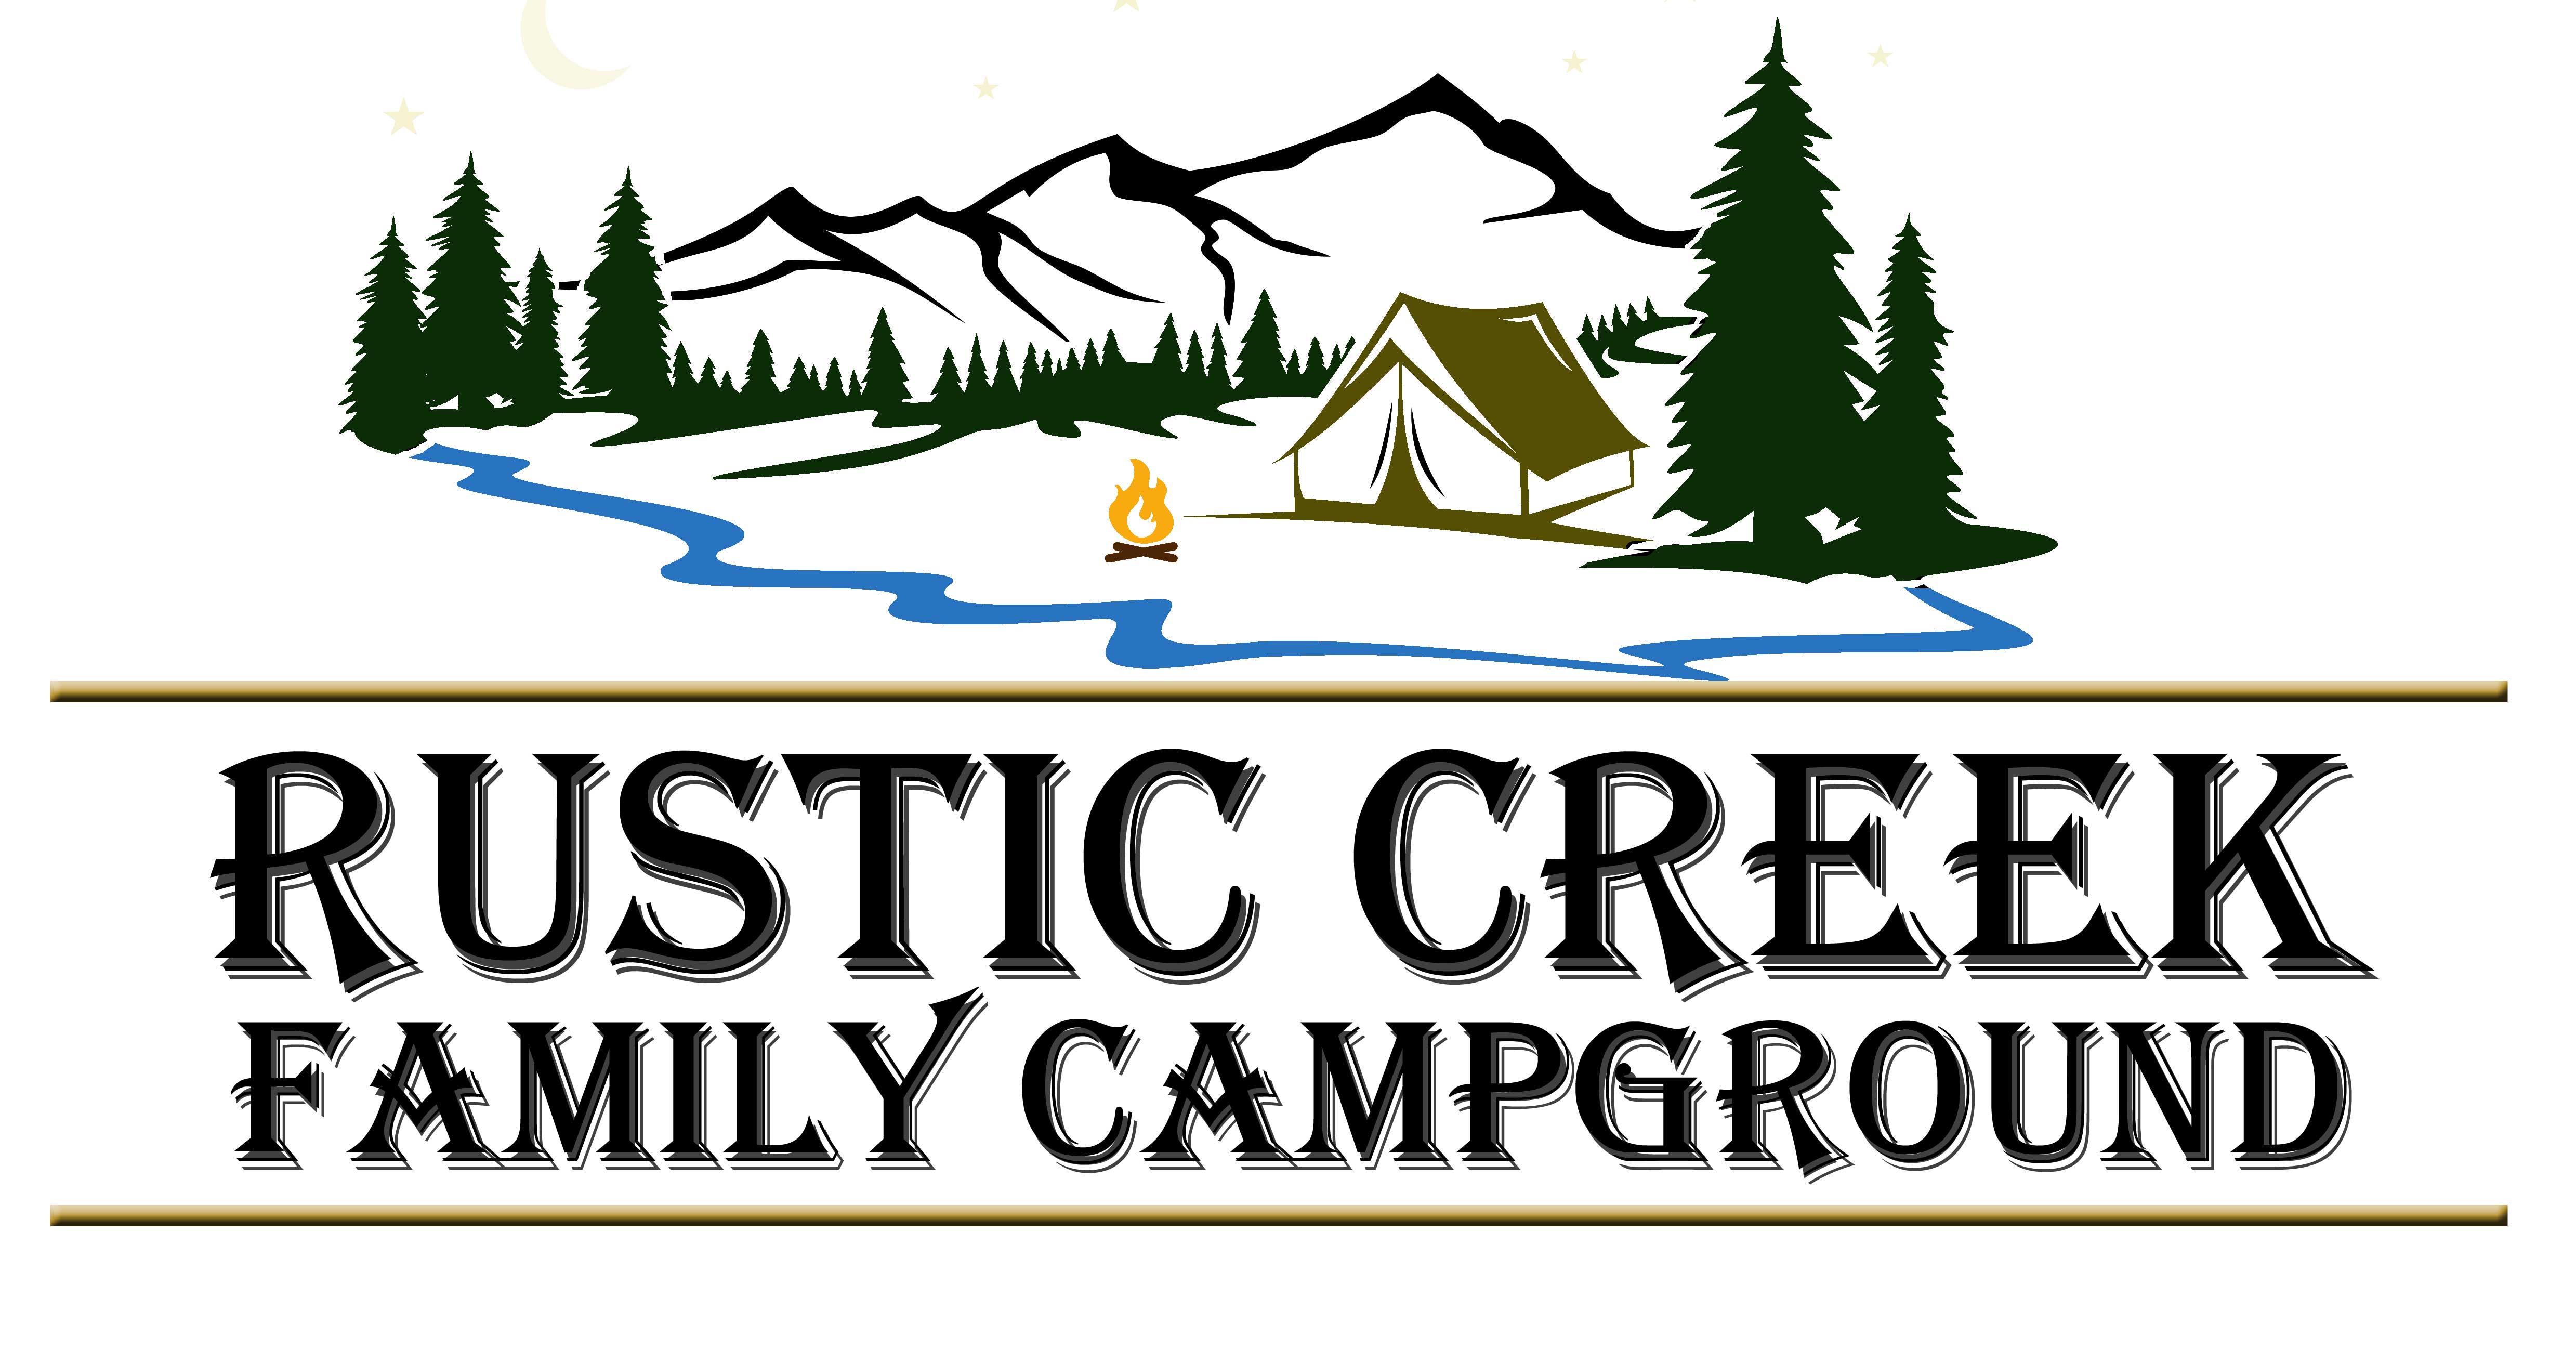 RUSTIC Creek Family Campground Logo